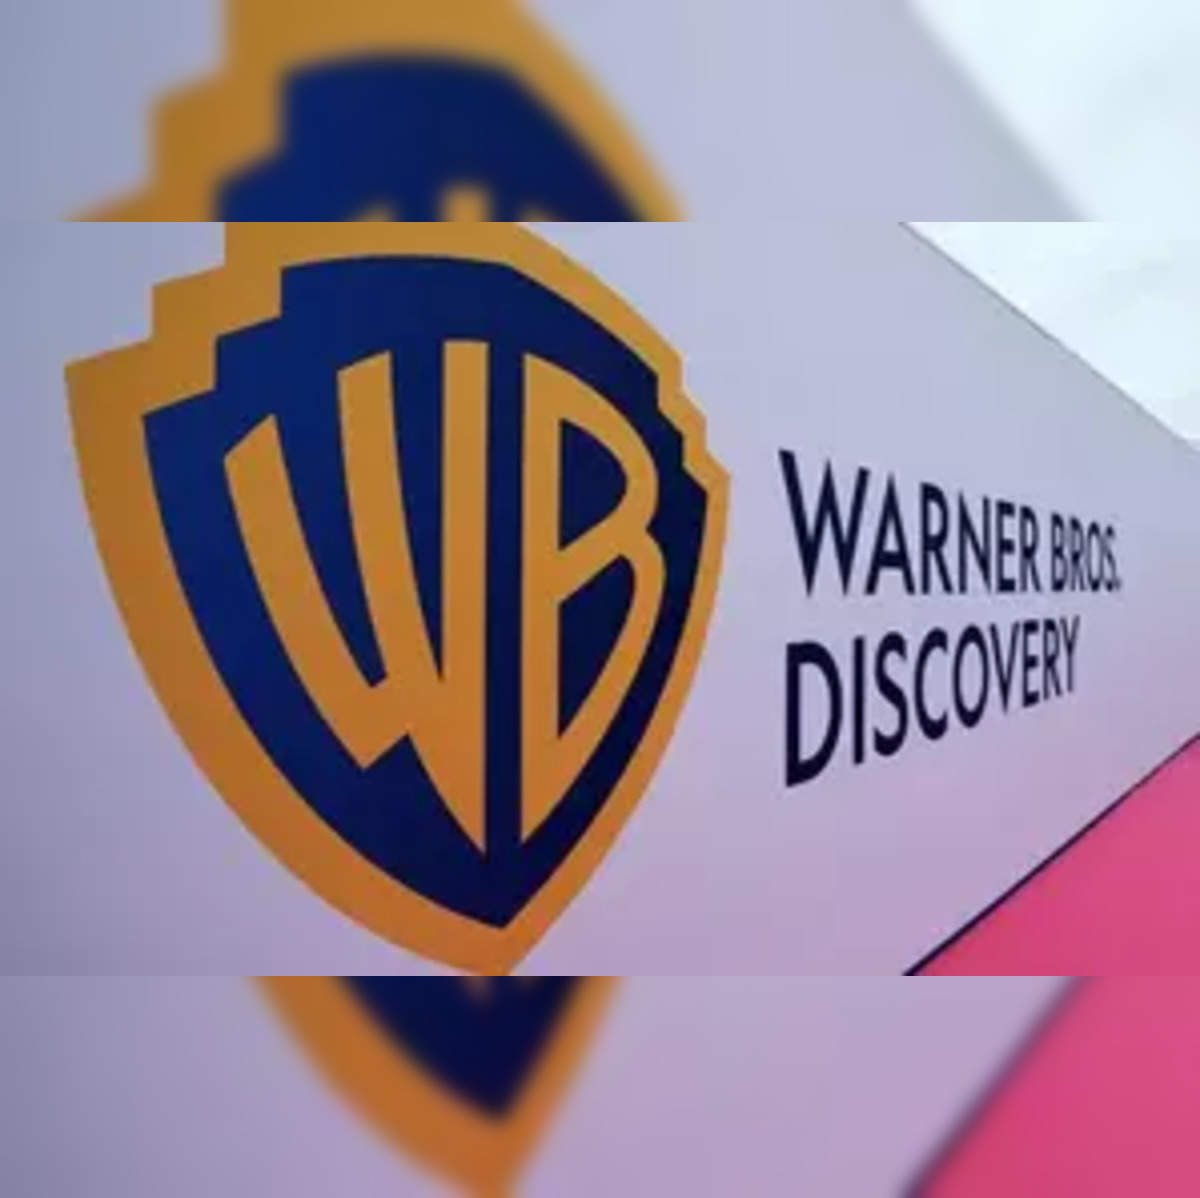 What you need to know about the Warner Bros Discovery merger